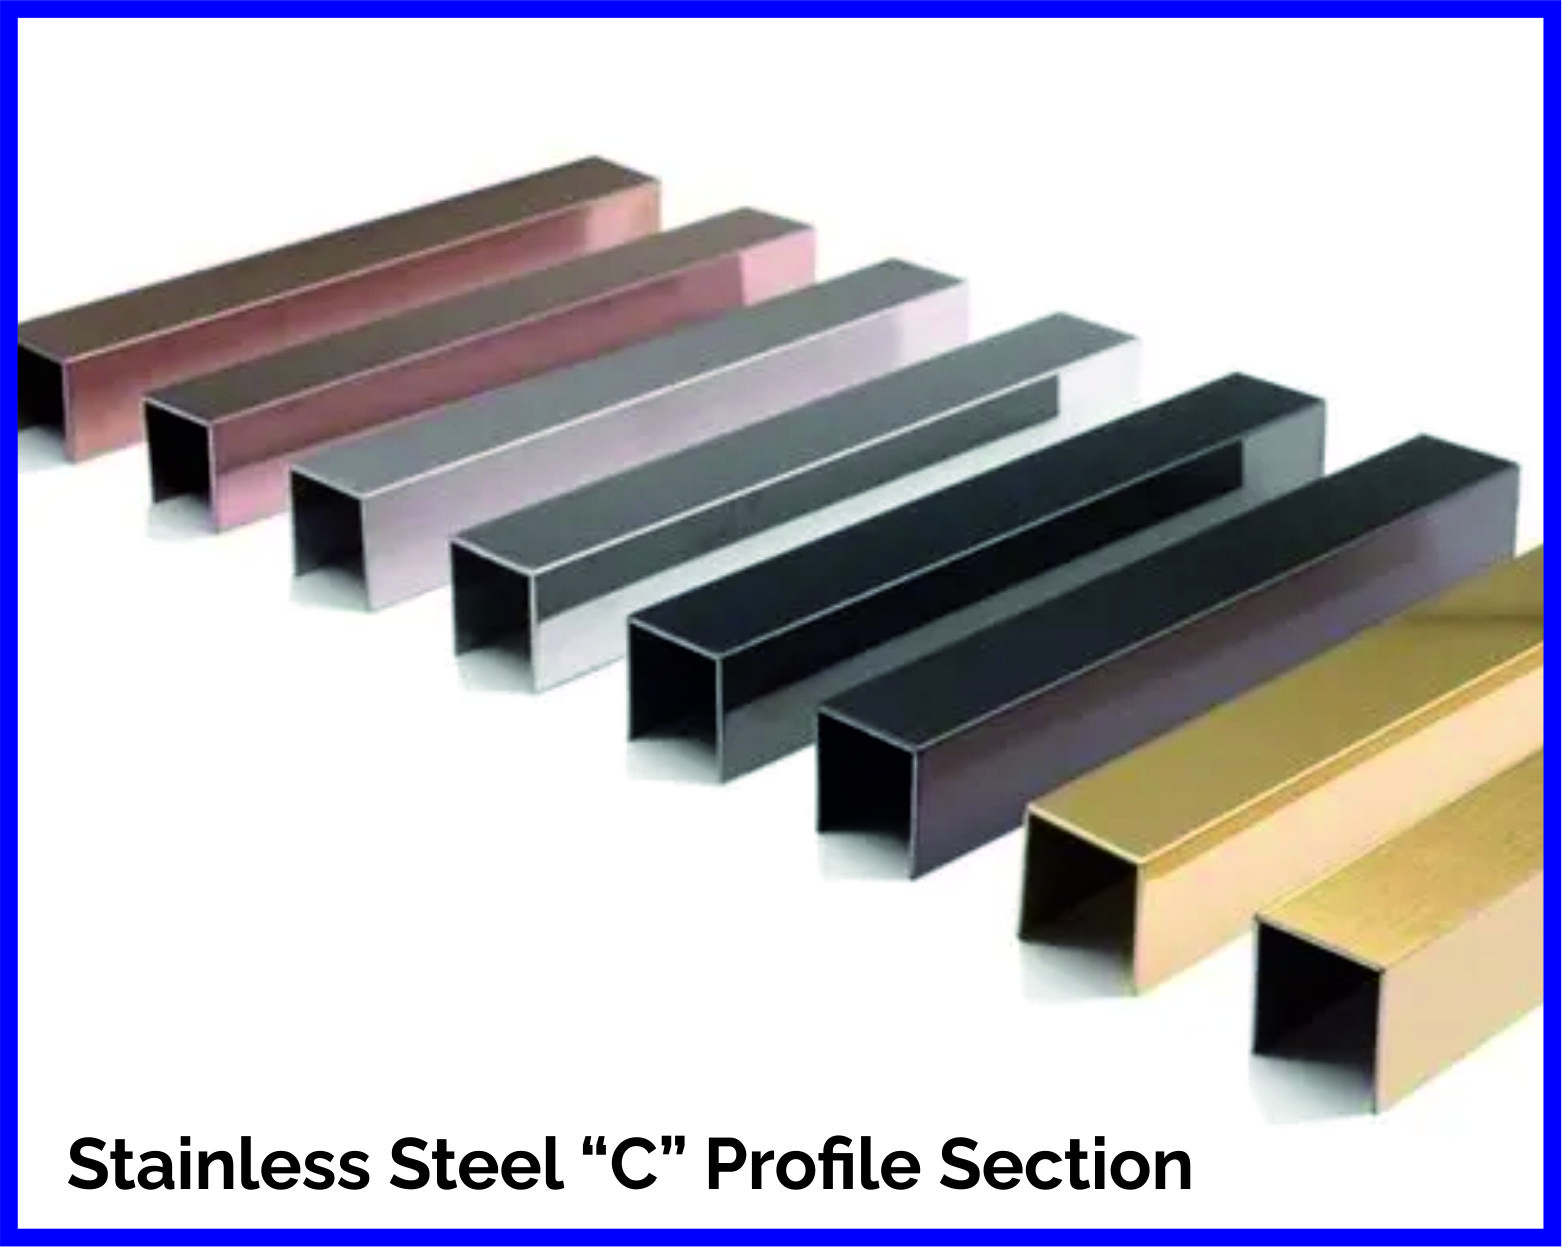 Decorative Stainless Steel C Profile Section